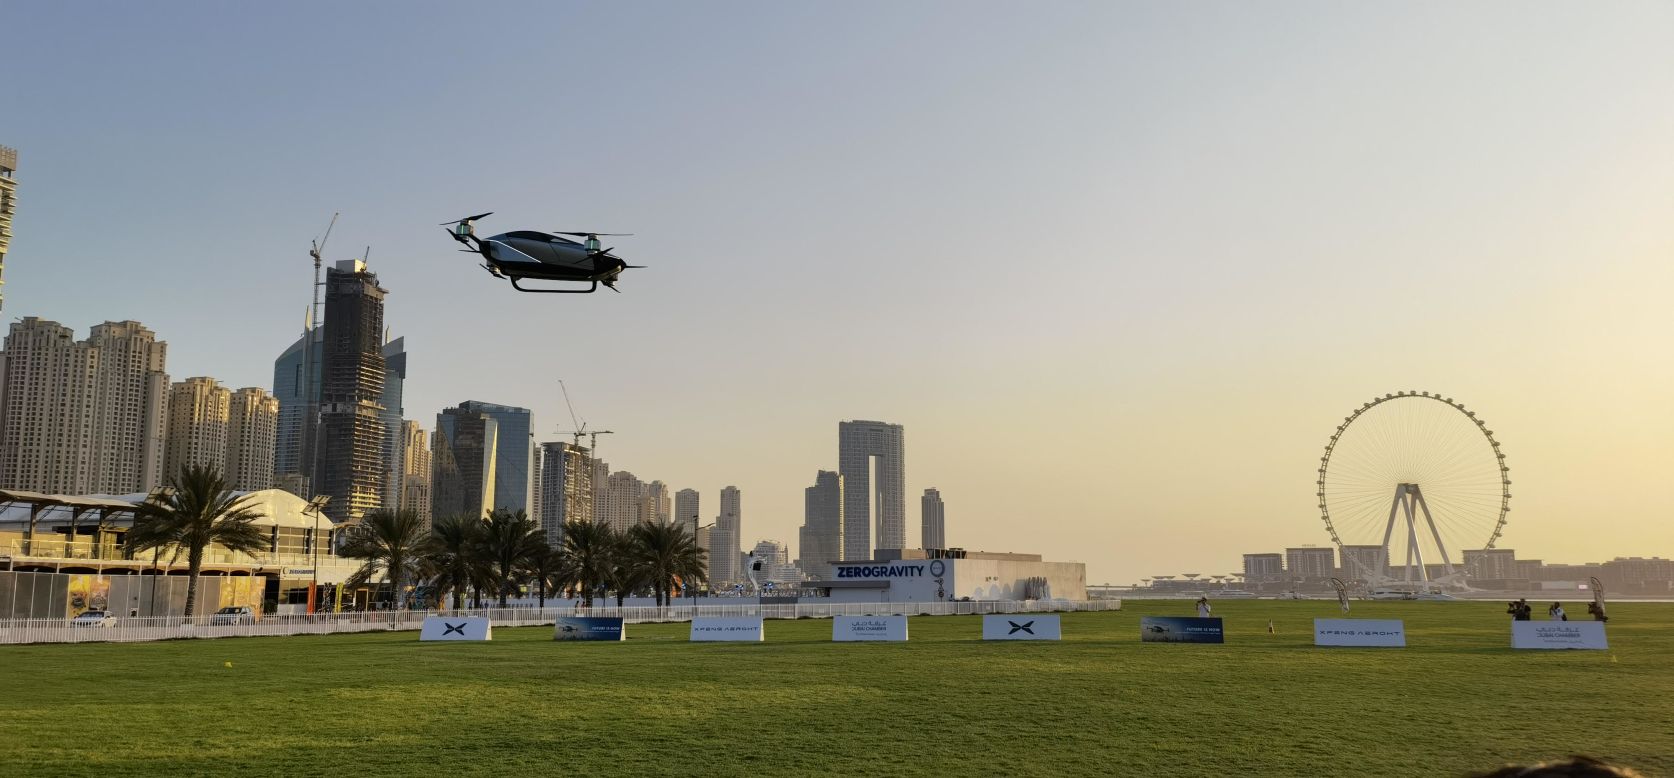 Dubai has long planned for a flying taxi service. The XPeng X2 electric flying car completed its first public test flight in Dubai at the Gitex technology expo in October 2022.